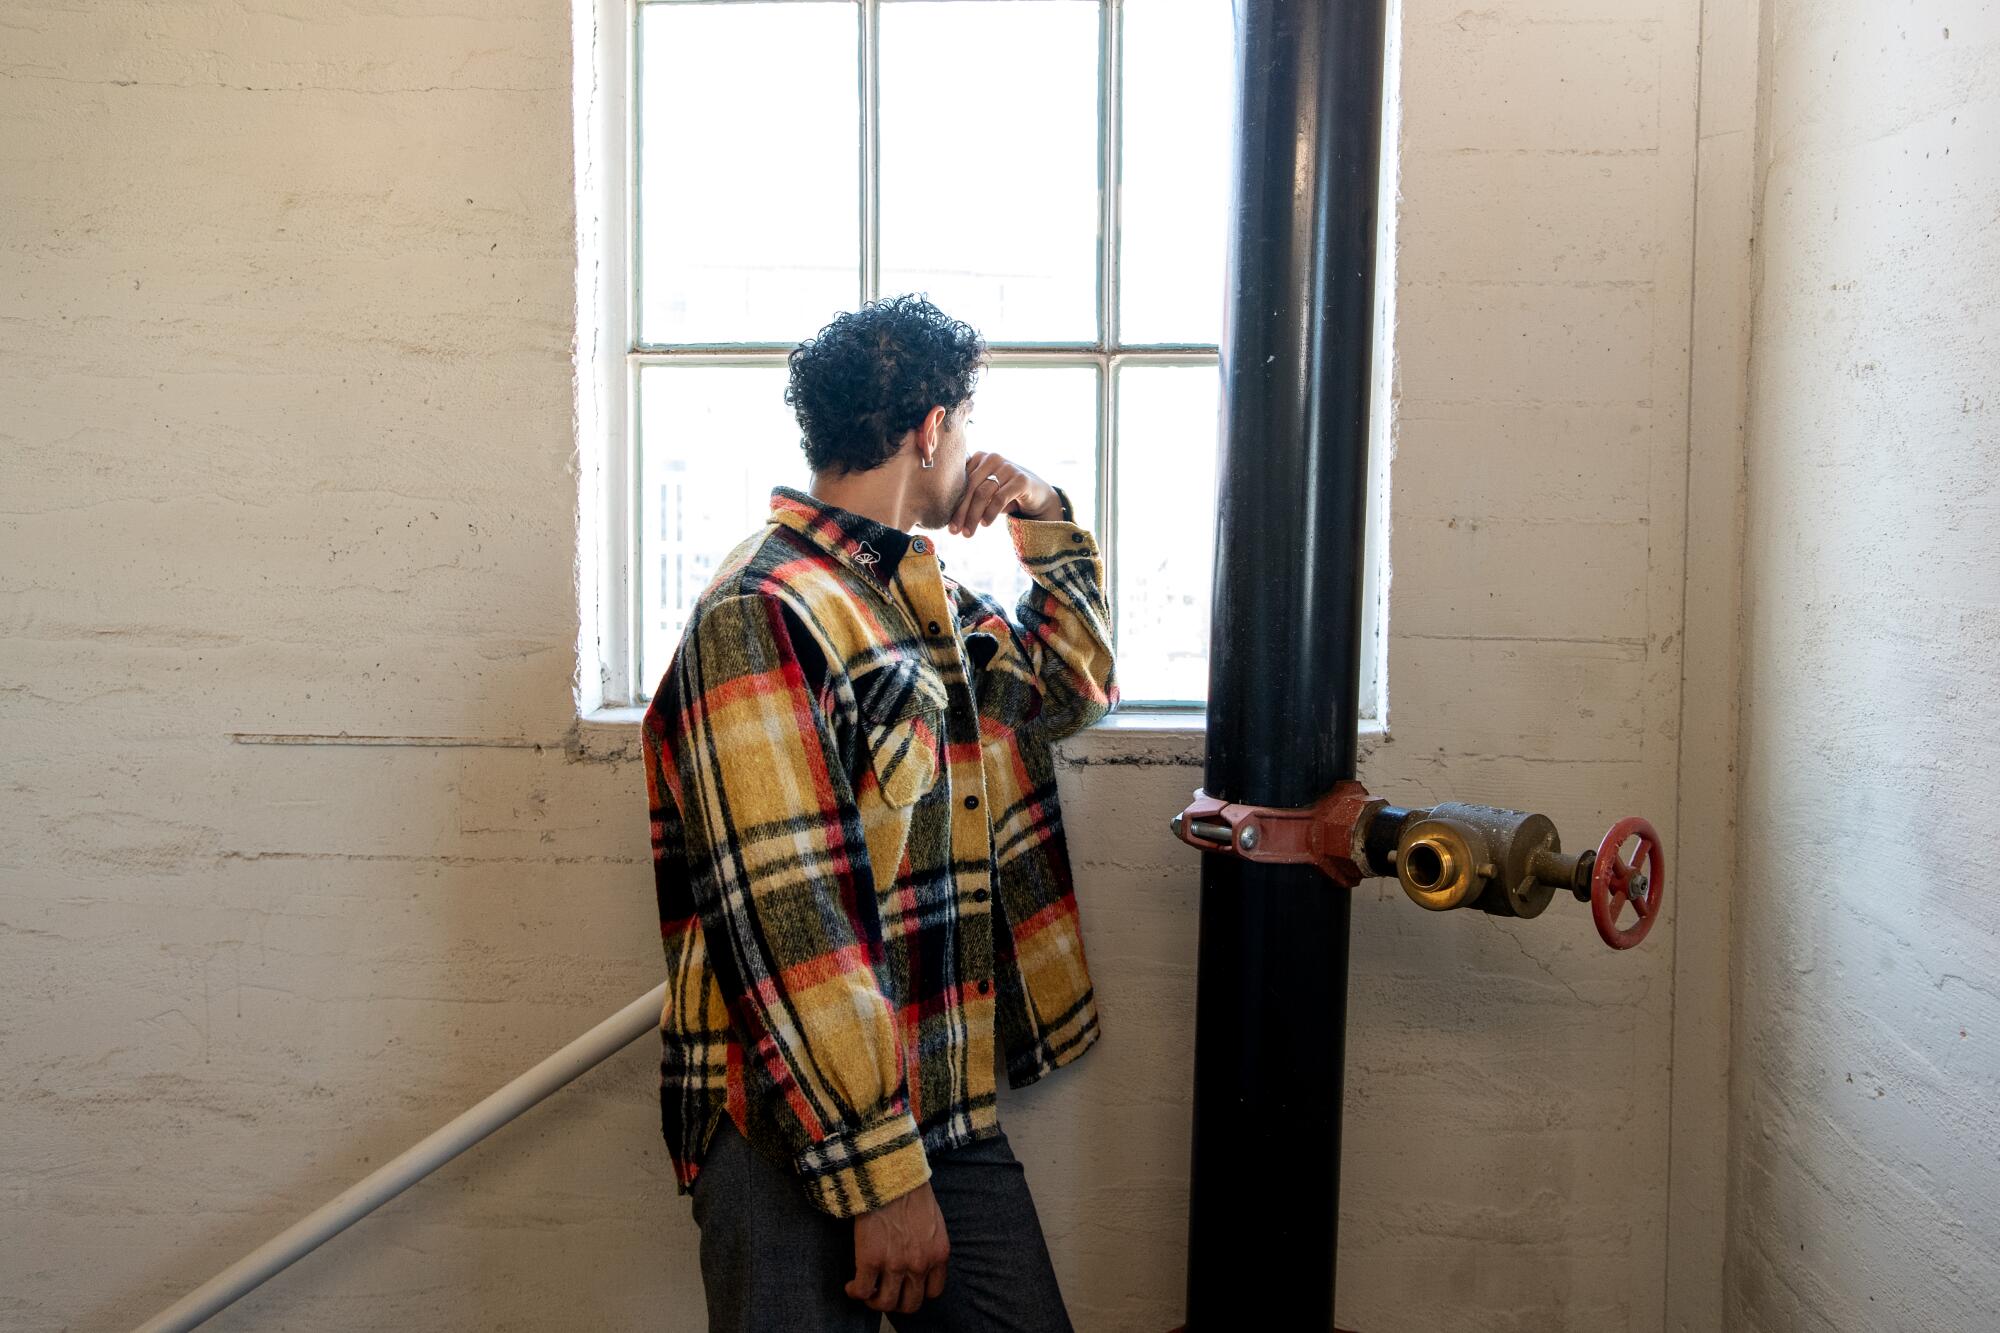 A man stands in a stairwell wearing a plaid yellow, green, and red jacket.